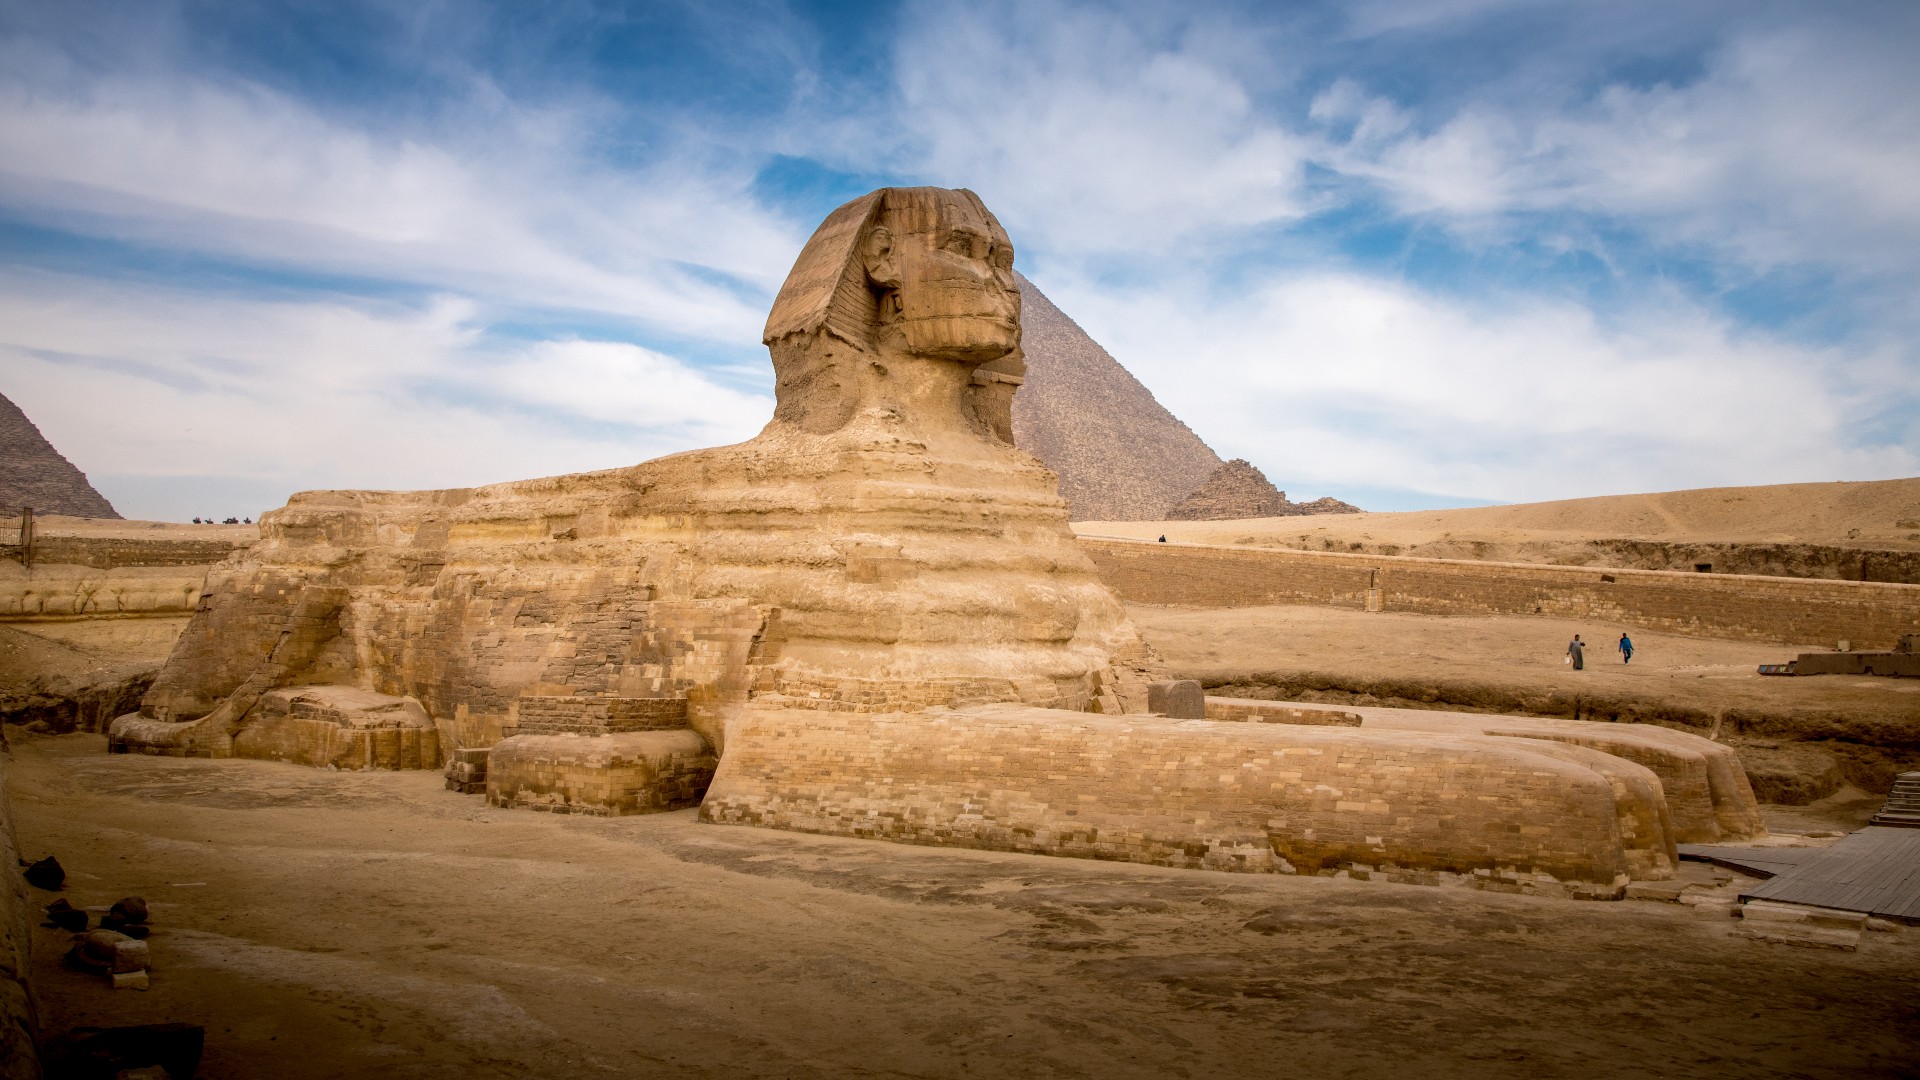 The Sphinx laying down in front of the Great Pyramid of Giza in Egypt. Kitti Boonnitrod via Getty Images.